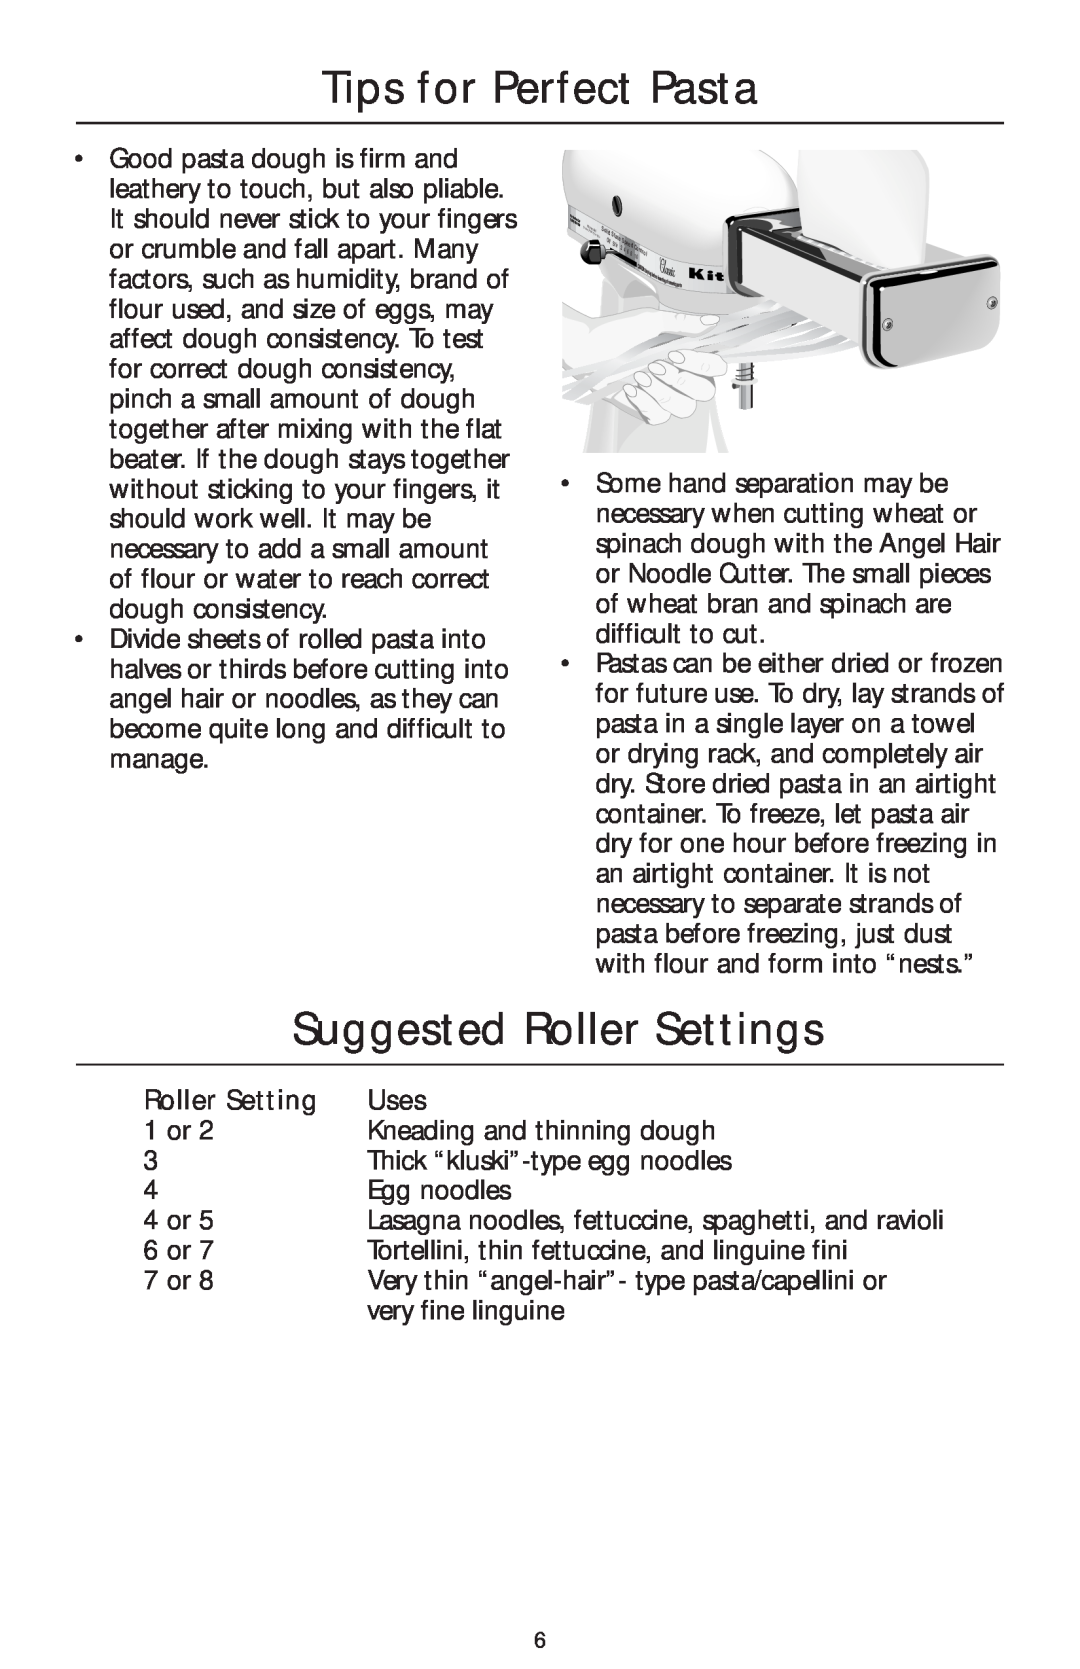 KitchenAid KPCA manual Tips for Perfect Pasta, Suggested Roller Settings, Uses 